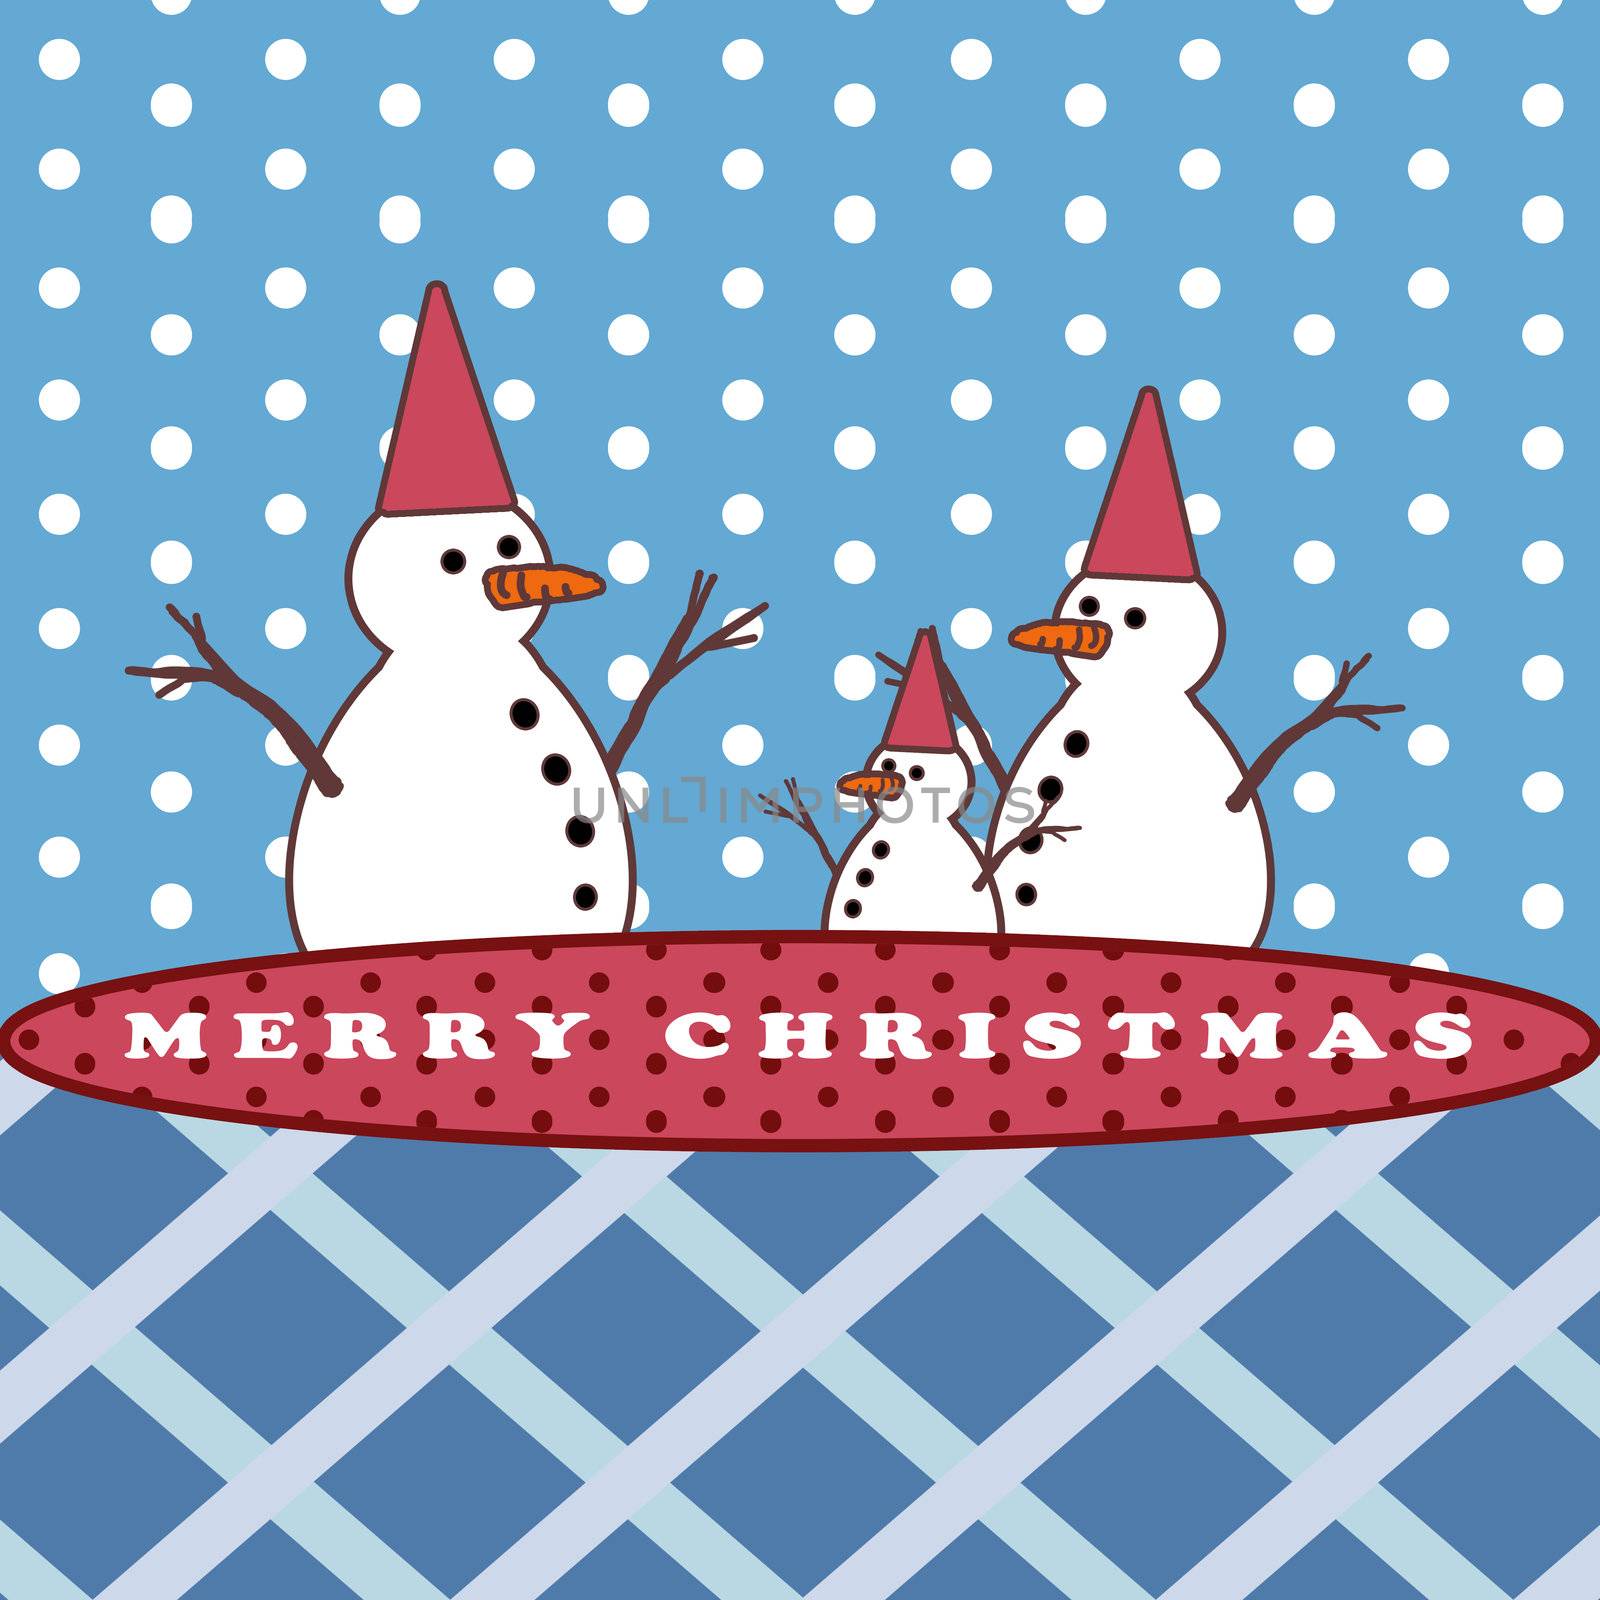 Snowman and the snowing, Christmas greeting card background by pixbox77